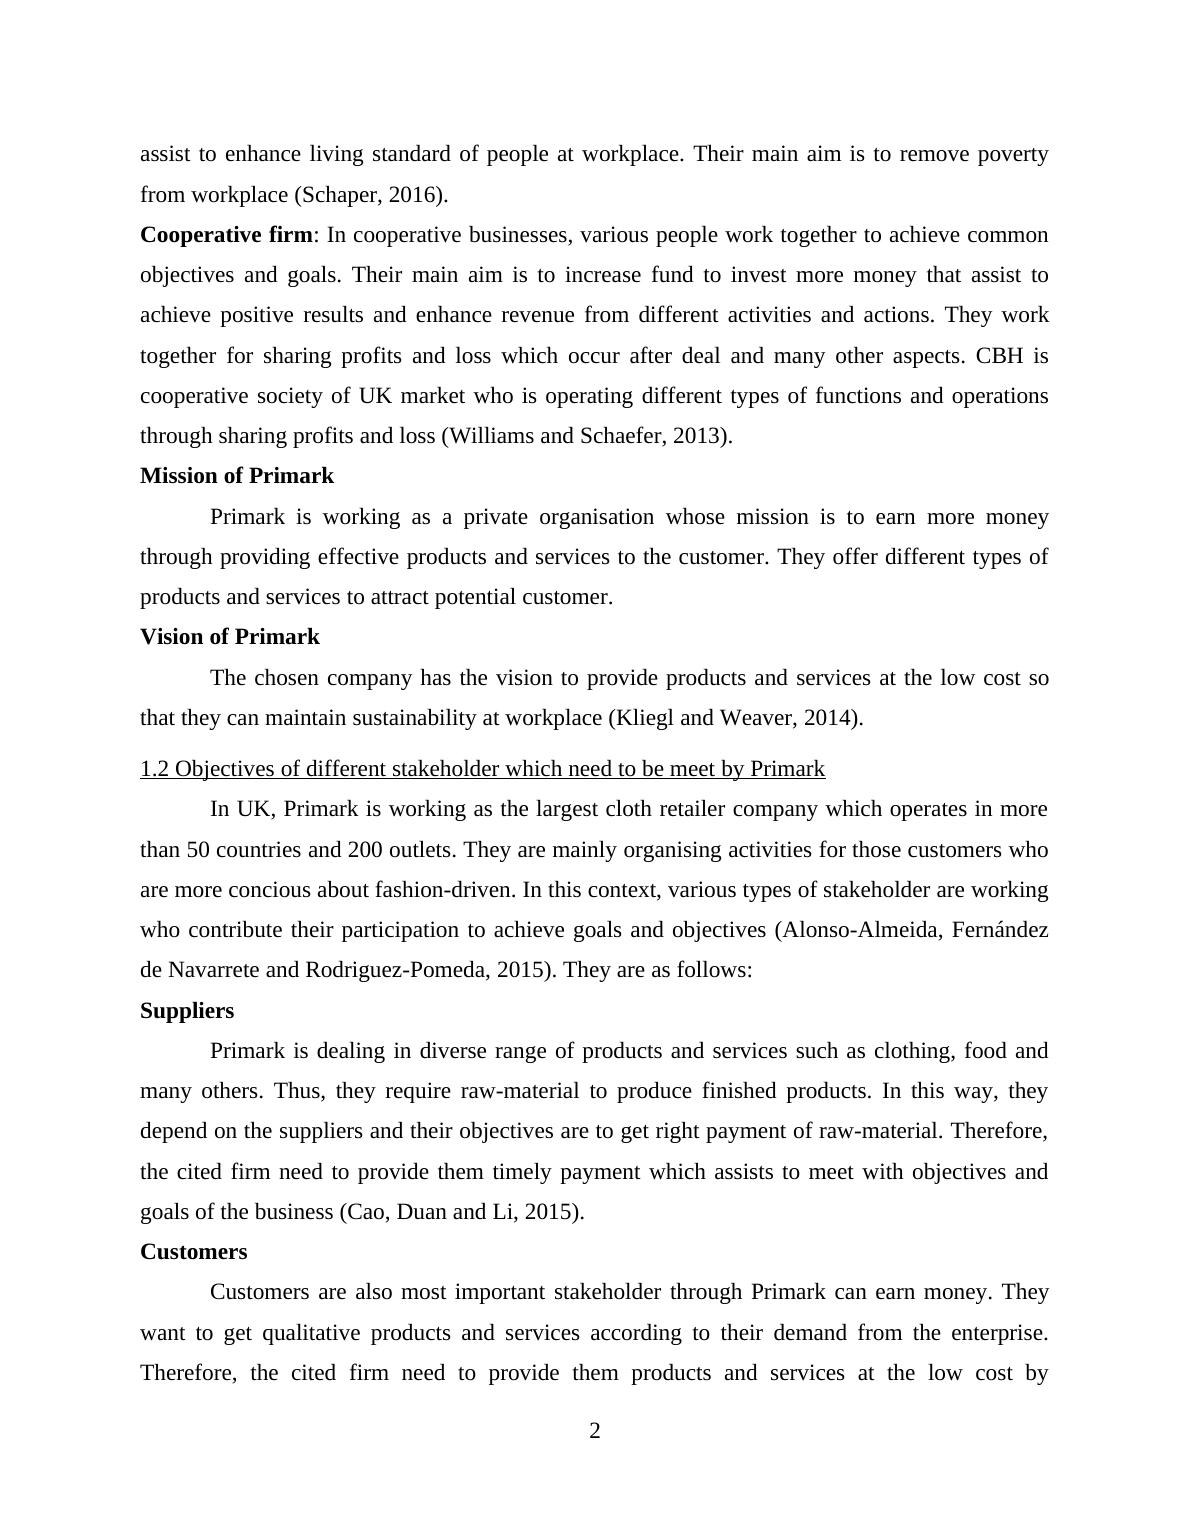 Report On PRIMARK - Business Environment_4